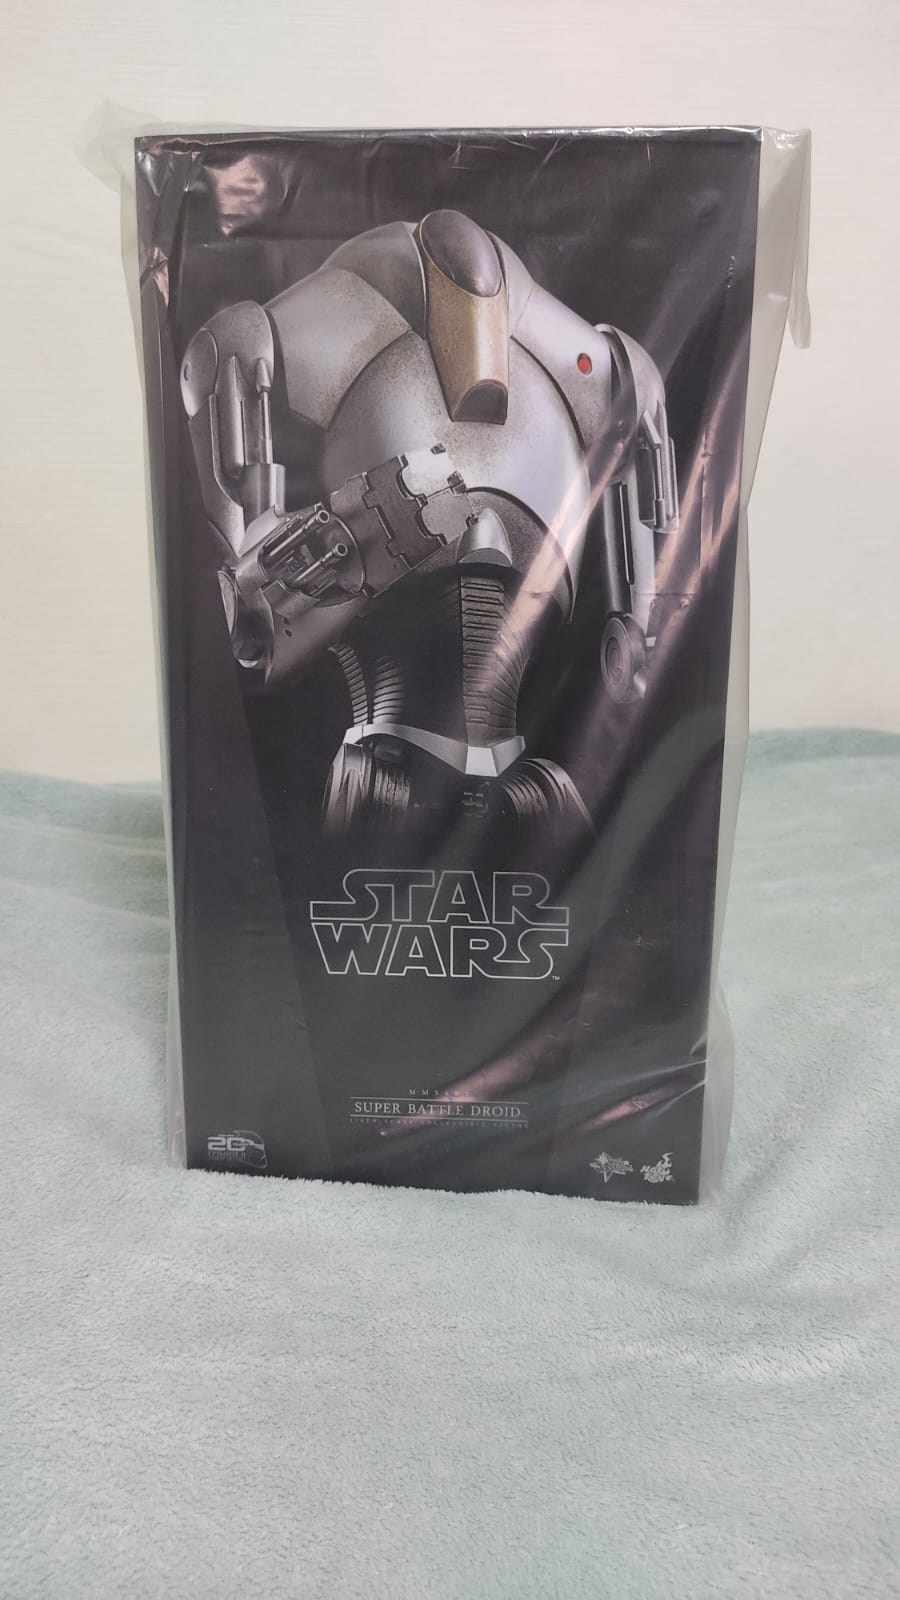 SuperBattleDroid - NEW PRODUCT: HOT TOYS: STAR WARS EPISODE II: ATTACK OF THE CLONES™ SUPER BATTLE DROID™ 1/6TH SCALE COLLECTIBLE FIGURE Whats156